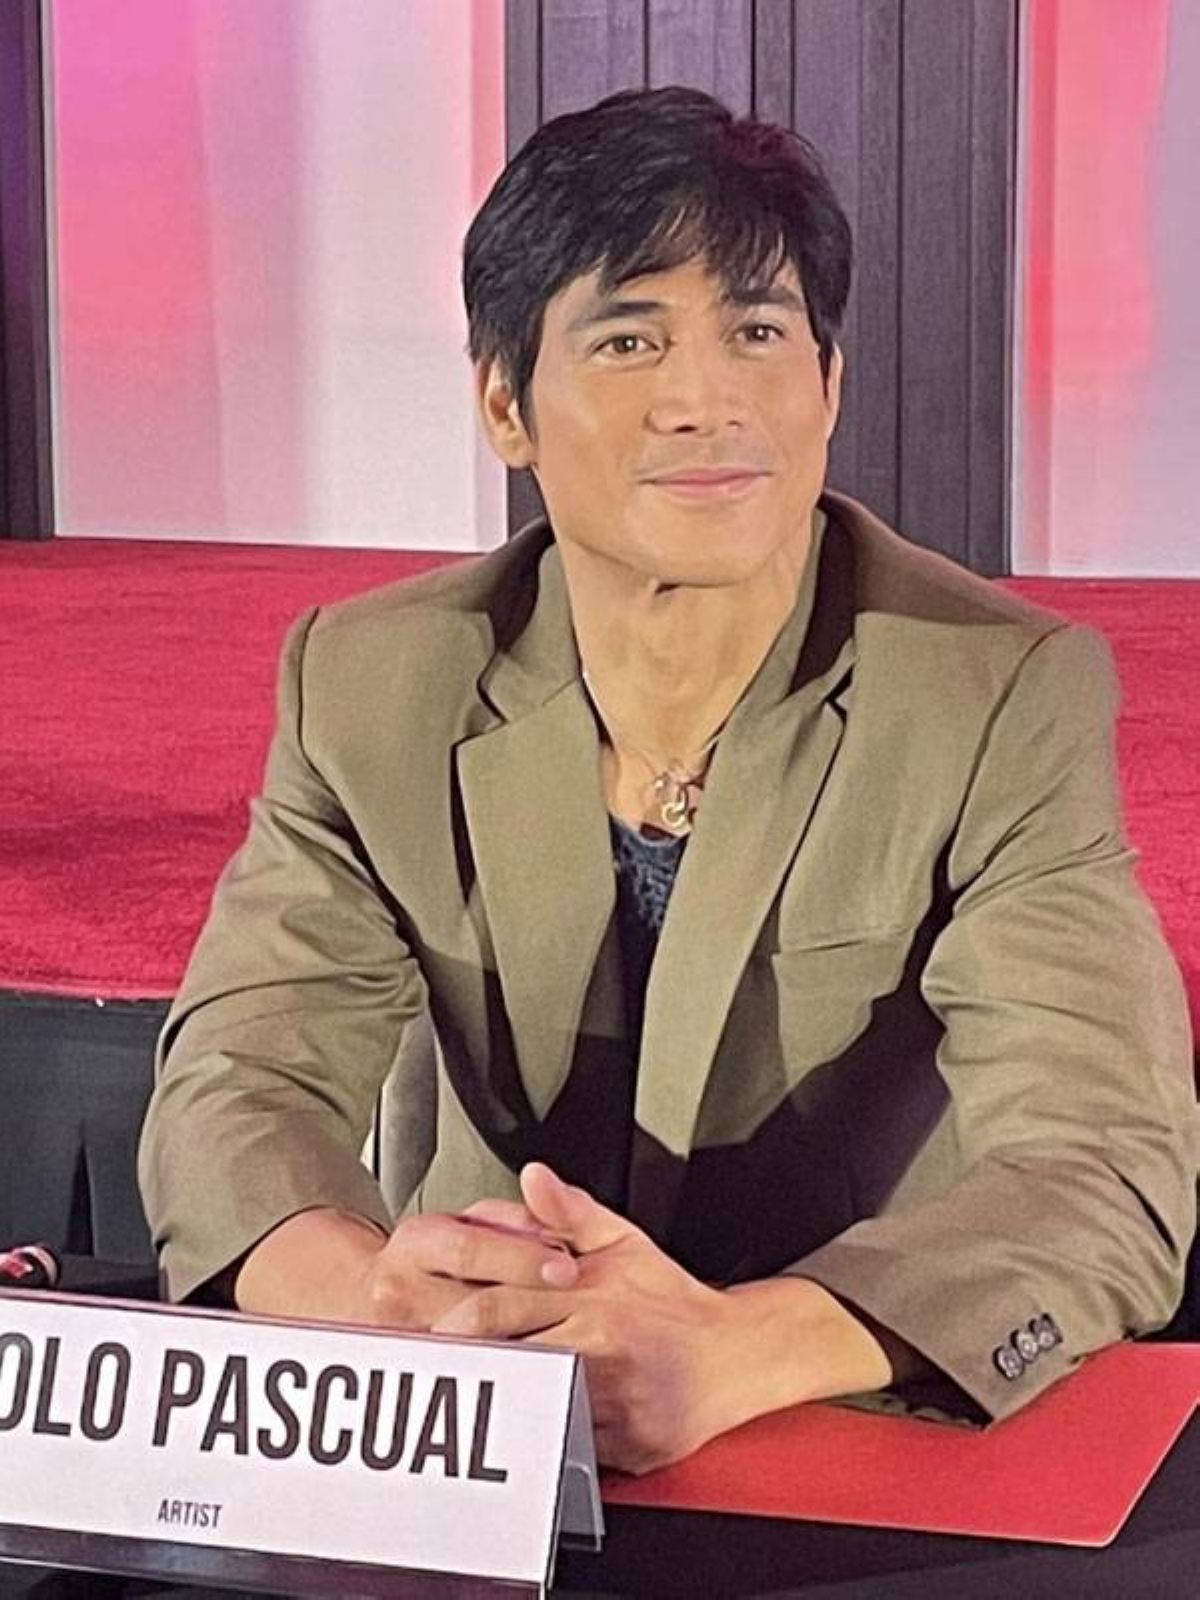 Piolo Pascual continues to steel his status as one of the country’s most versatile and prolific actors.